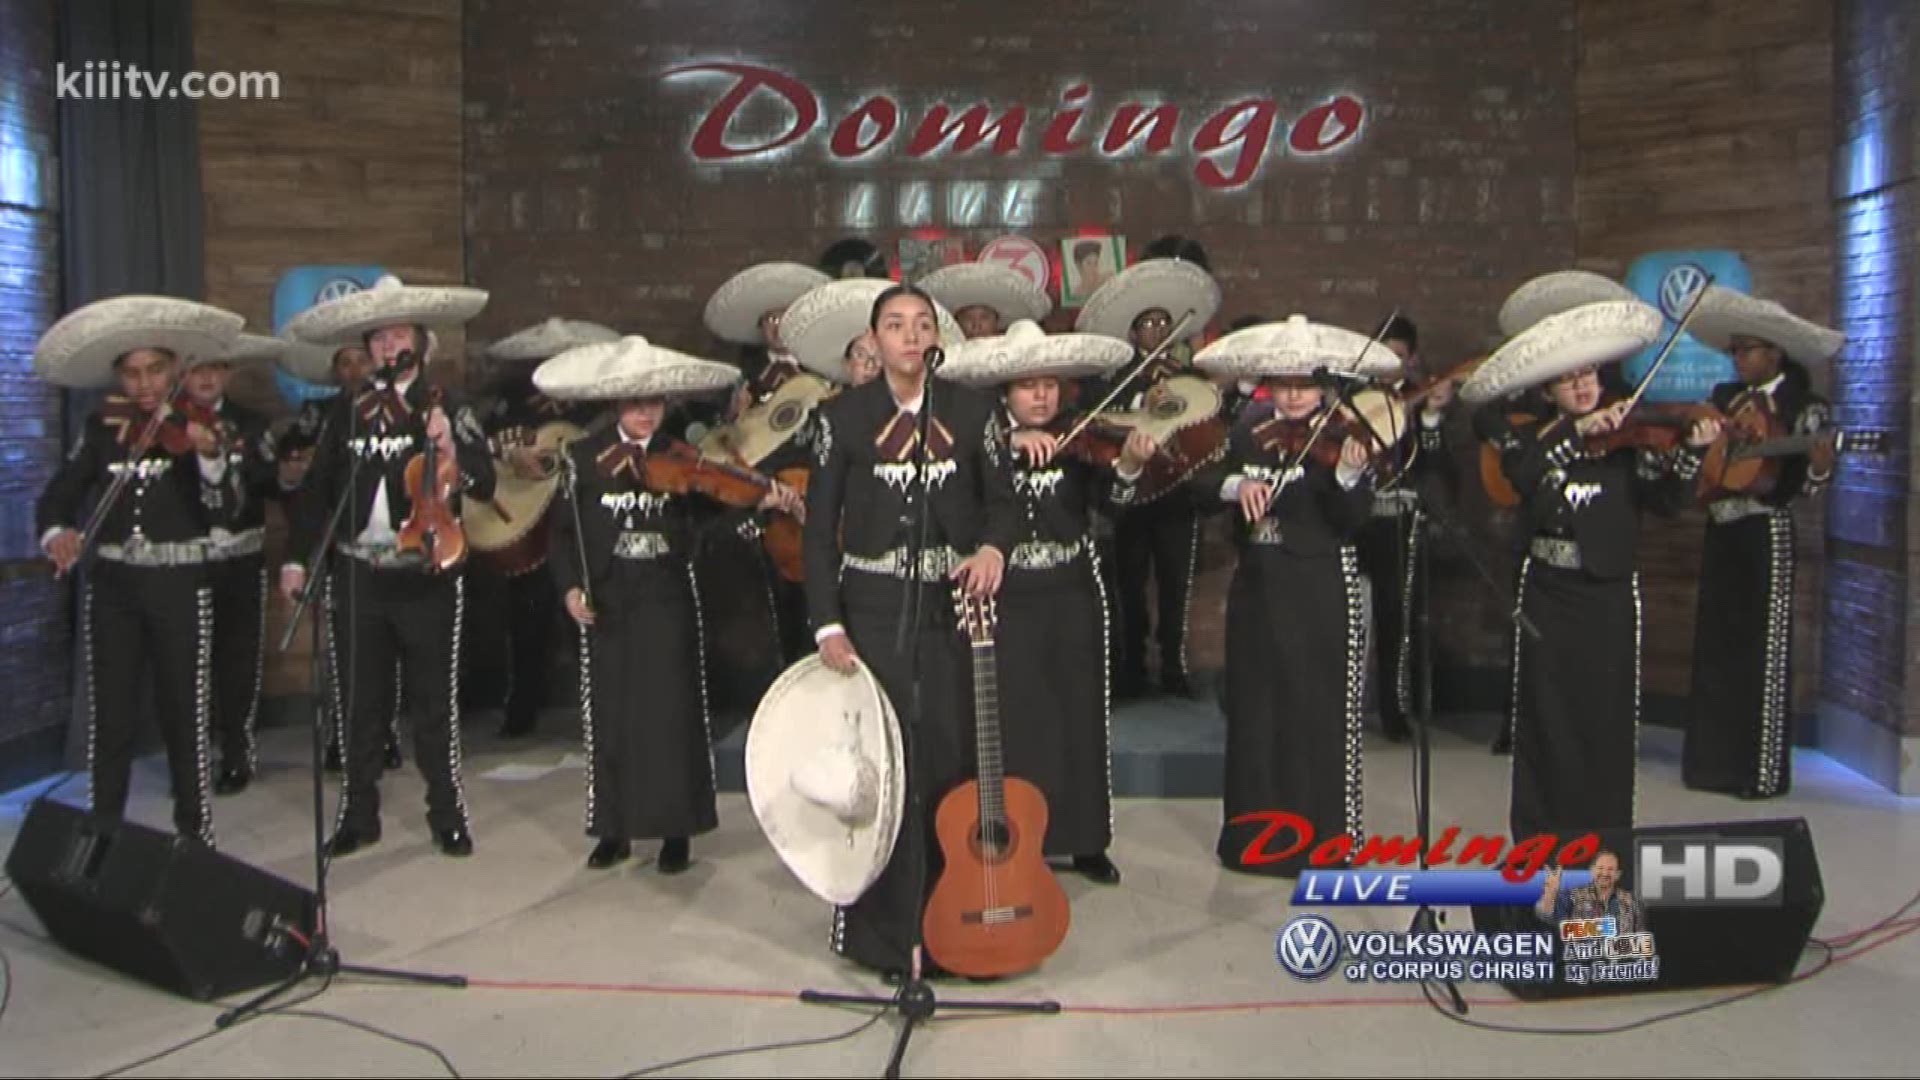 Tuloso Midway Middle School Mariachi performing "Tu Solo Tu" on Domingo Live.